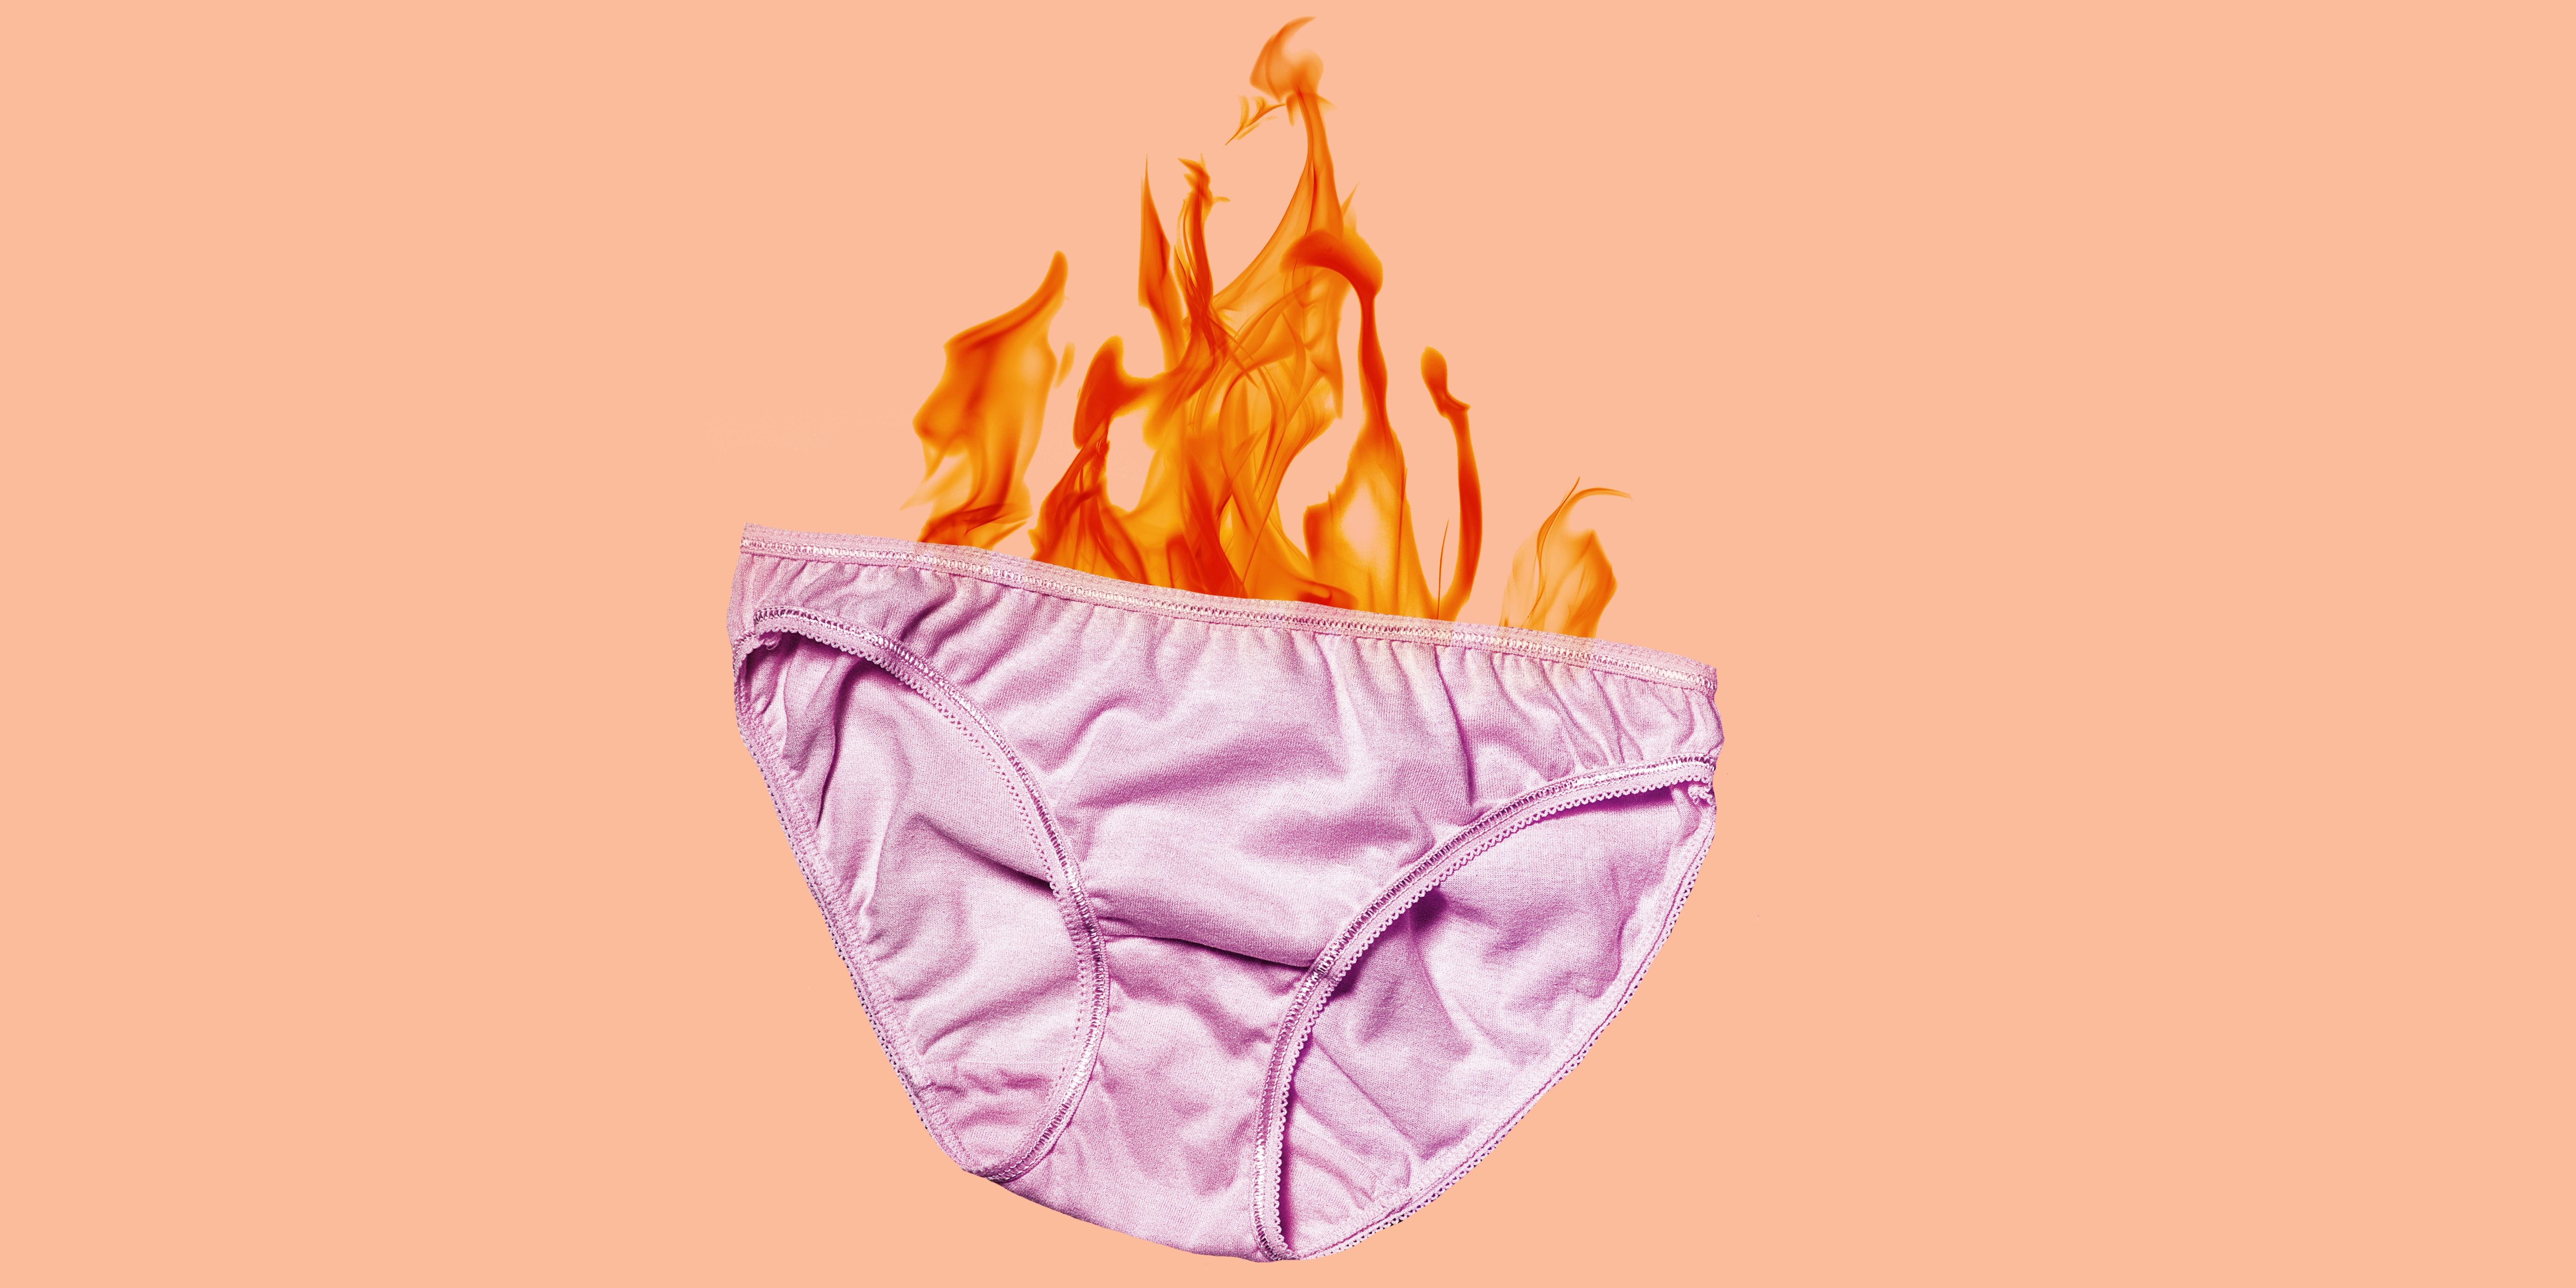 Is It Normal For Your Vagina to Burn